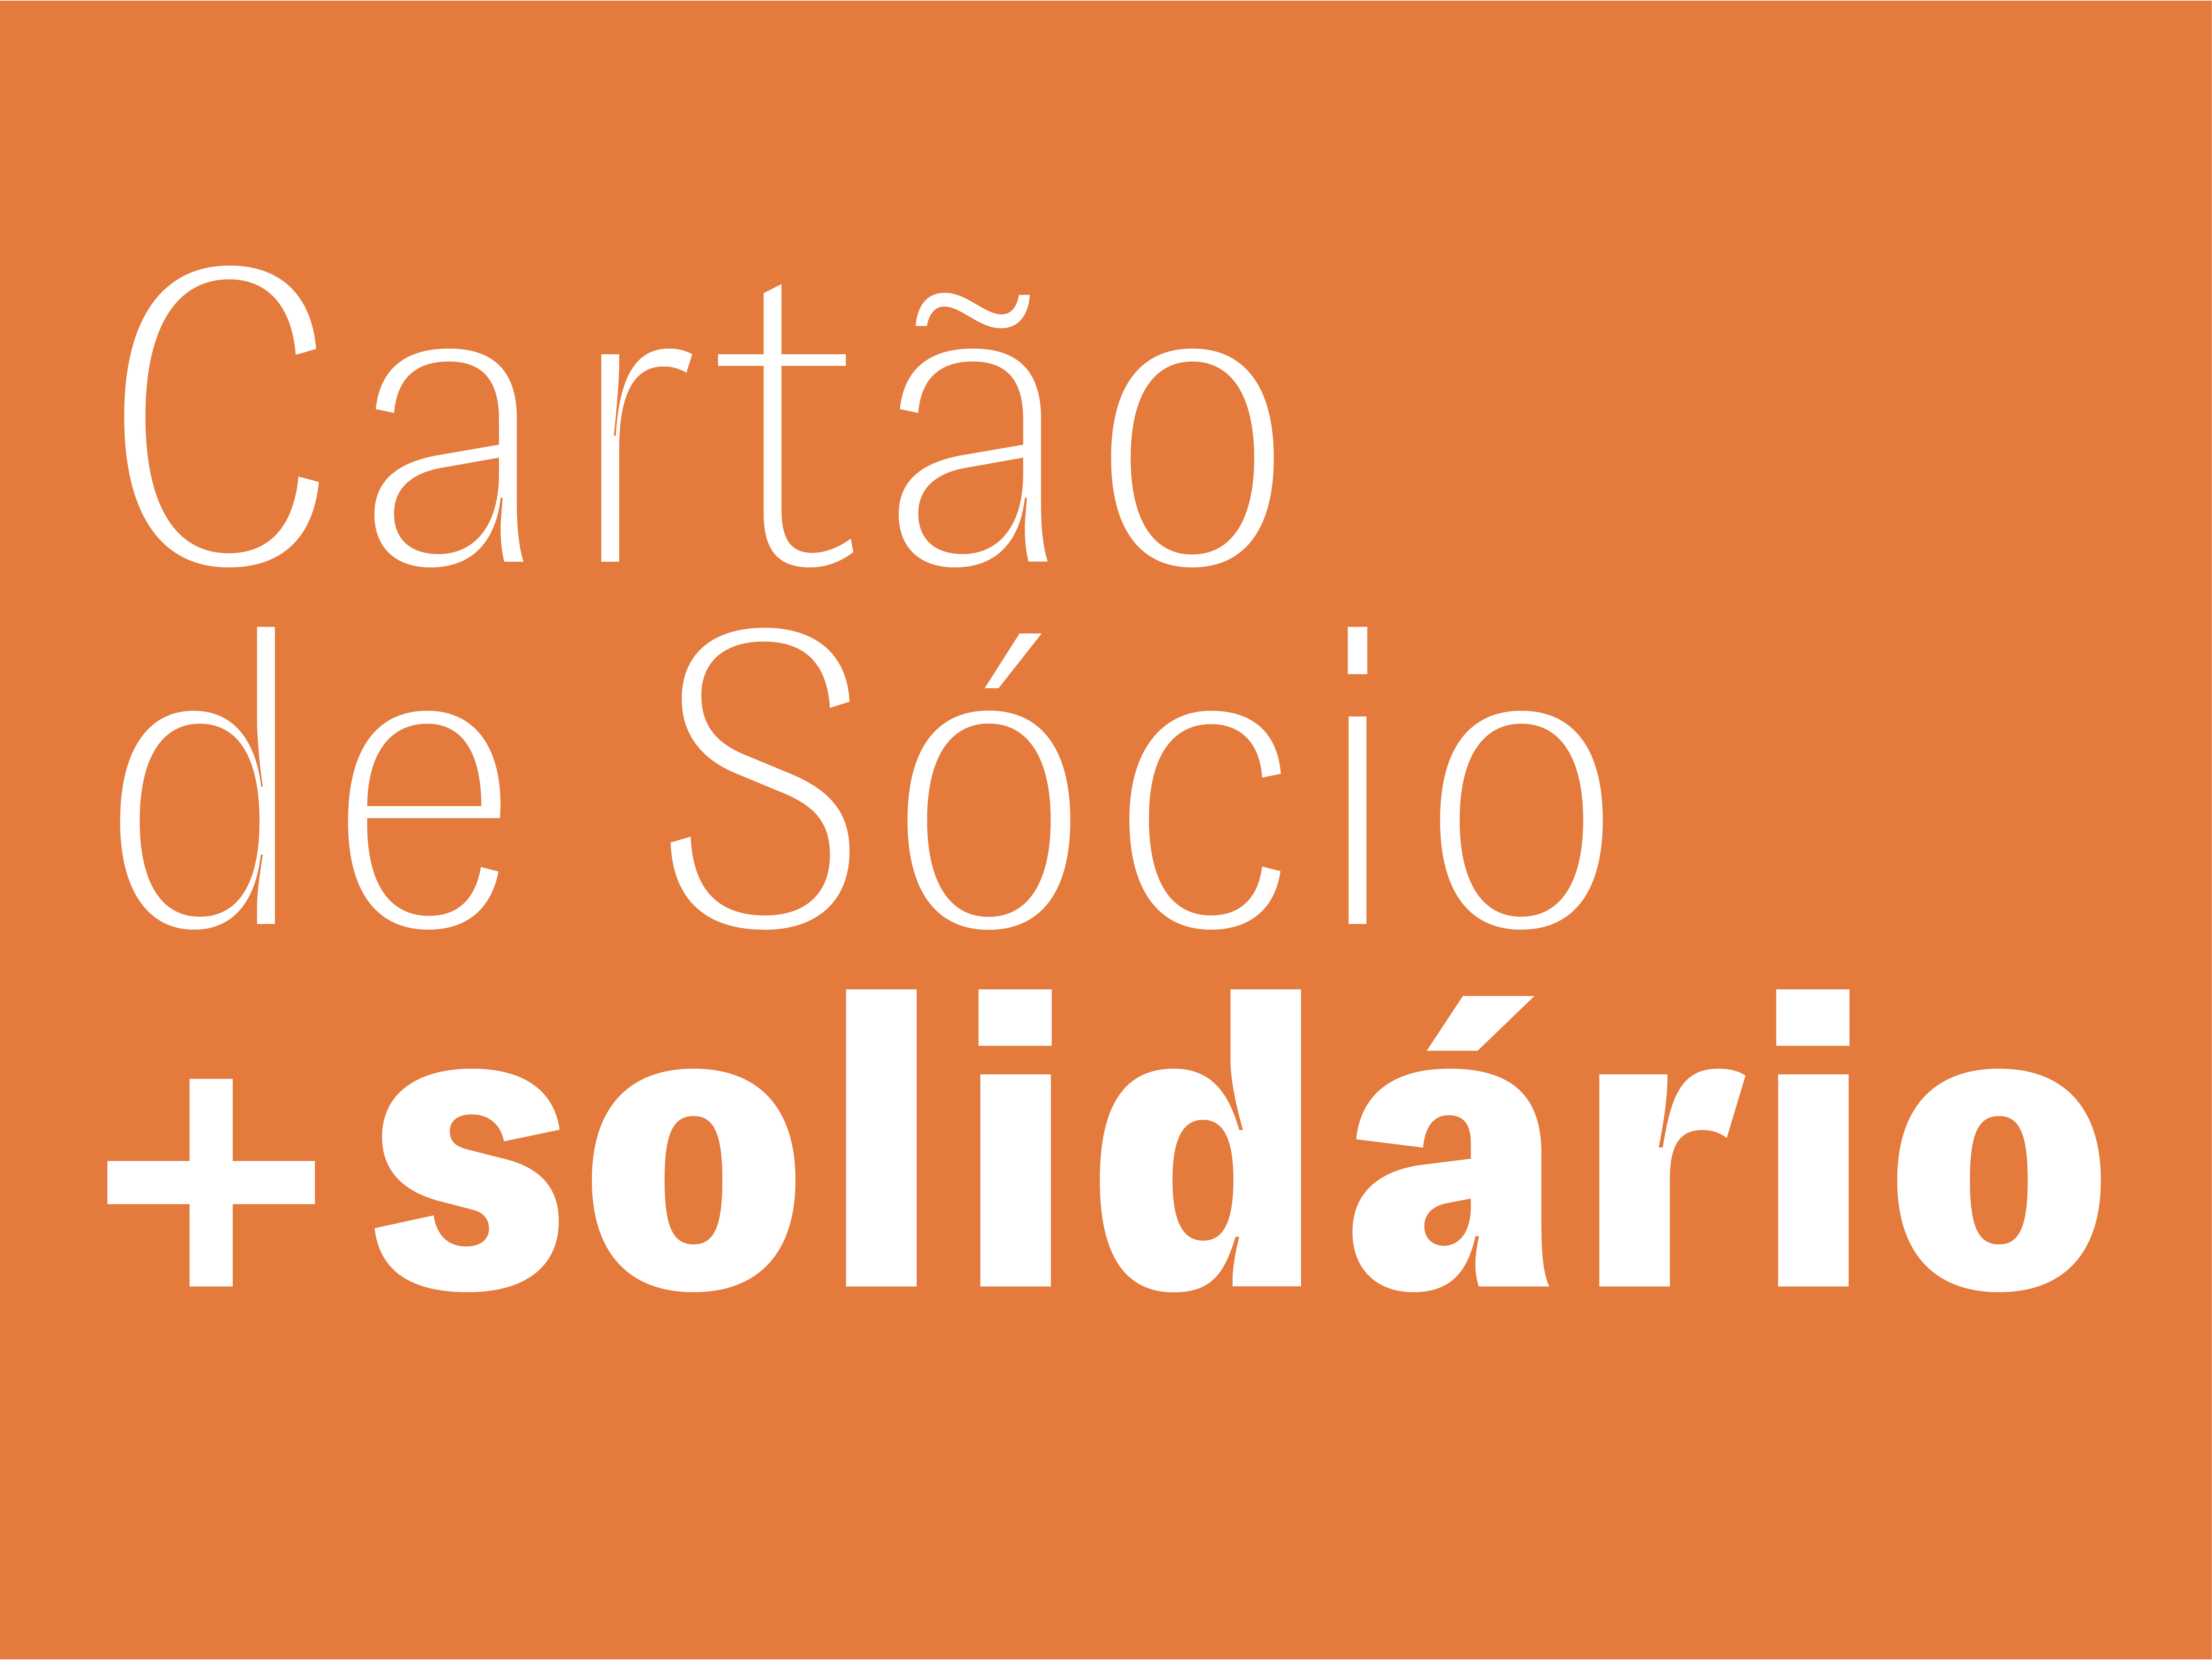 + Solidary - For all